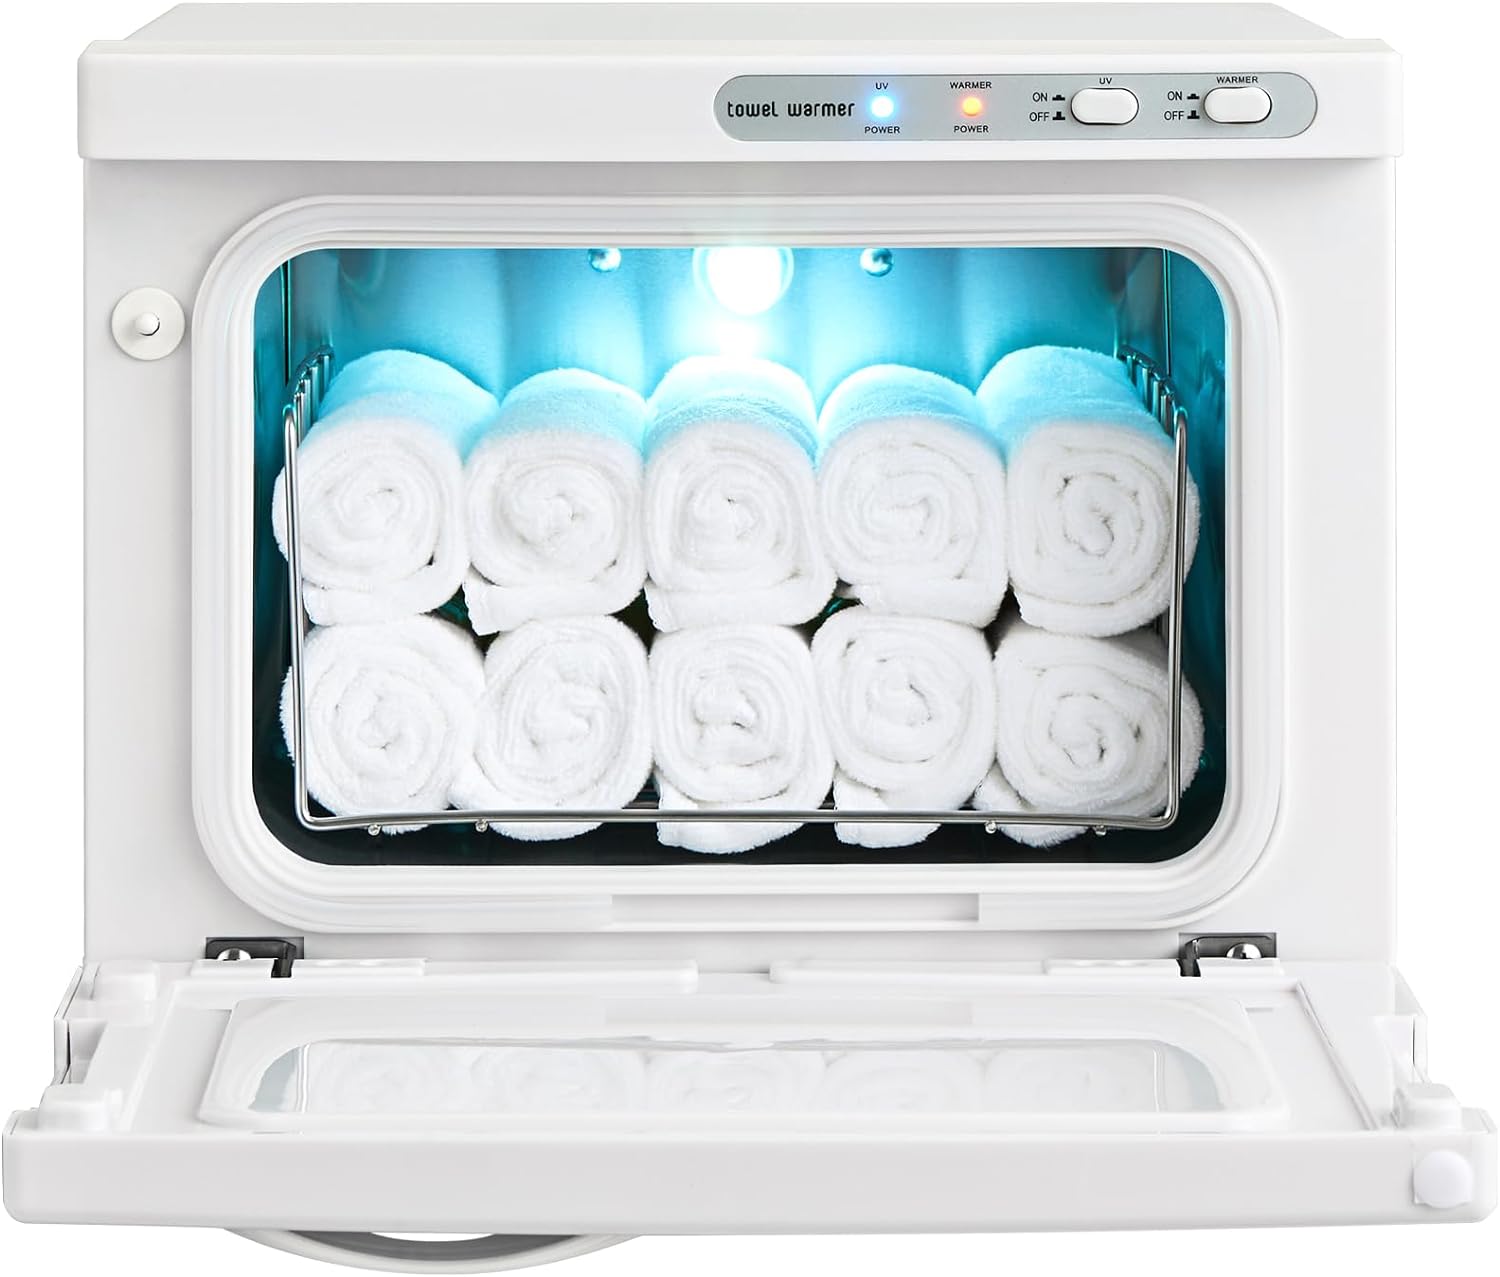 8L Hot Cabinet, 2-In-1 Warmer with a Stainless Steel Rack, Holds up to 16 Towels, Quick and All-Round Heating for Facials, SPA, Massage, Salon, Bathroom, Barber, Esthetician, Beauty, White